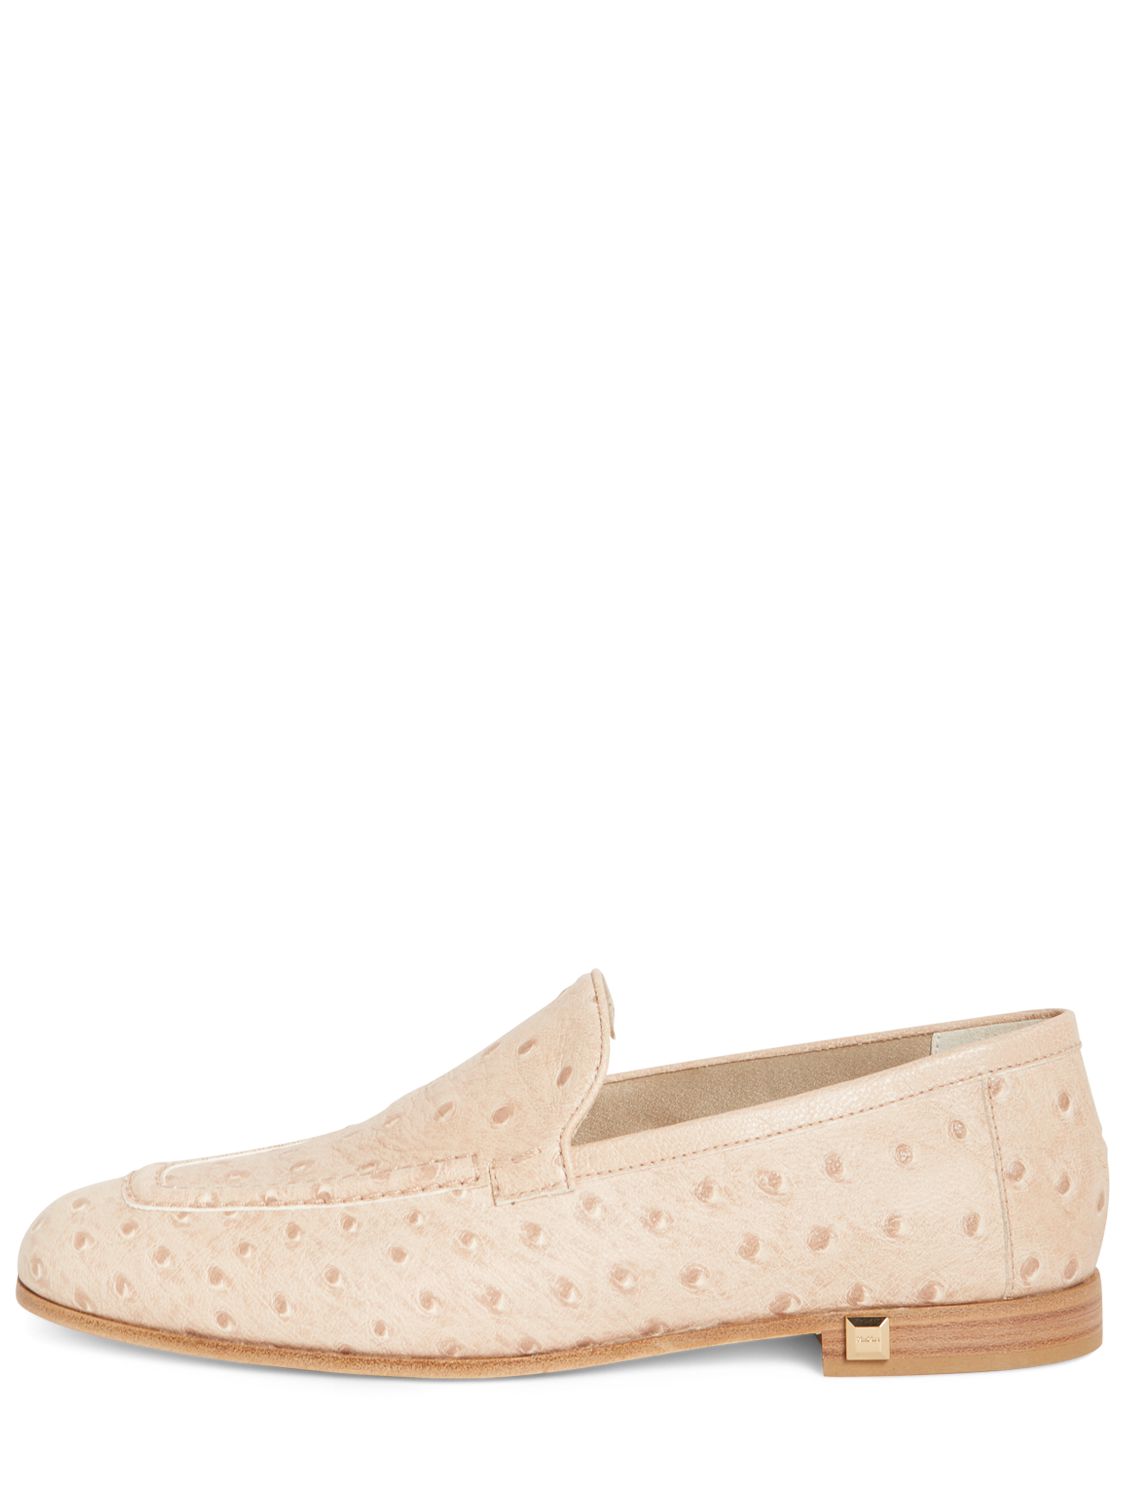 Max Mara 10mm Ostrich Print Leather Loafers In Beige